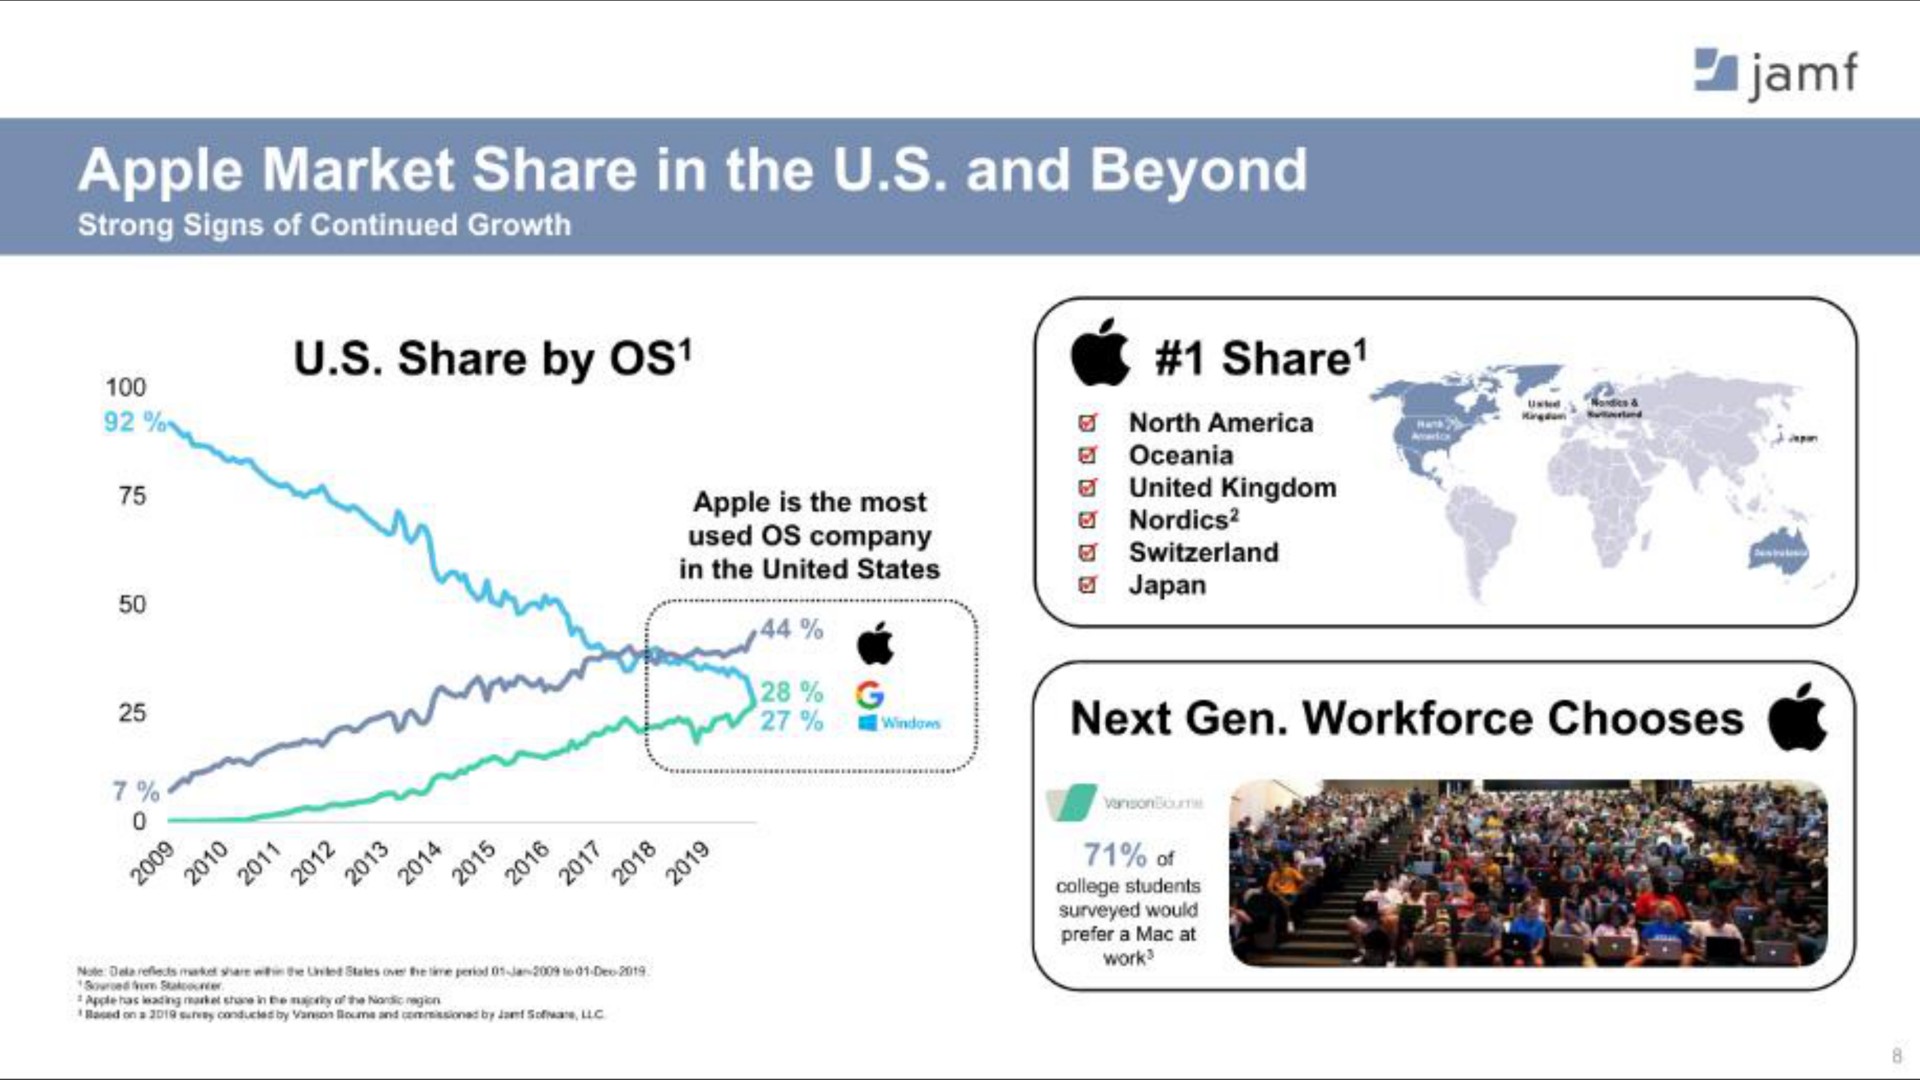 apple market share in the and beyond a i | Jamf